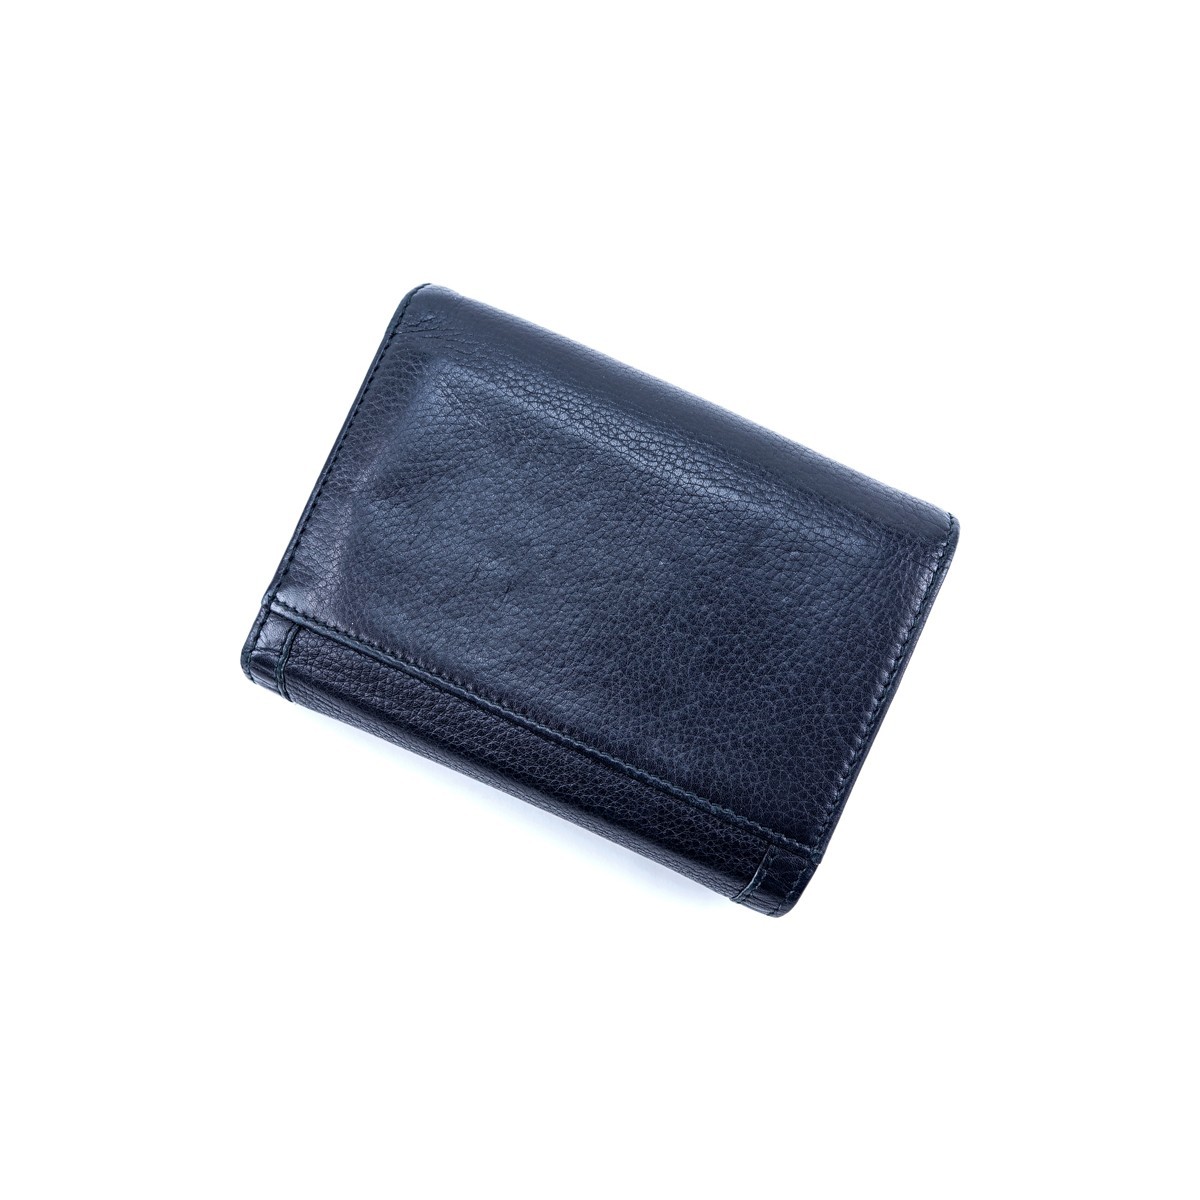 Gucci Black Grained Leather Bamboo Trifold Wallet. Bamboo and gold tone hardware.